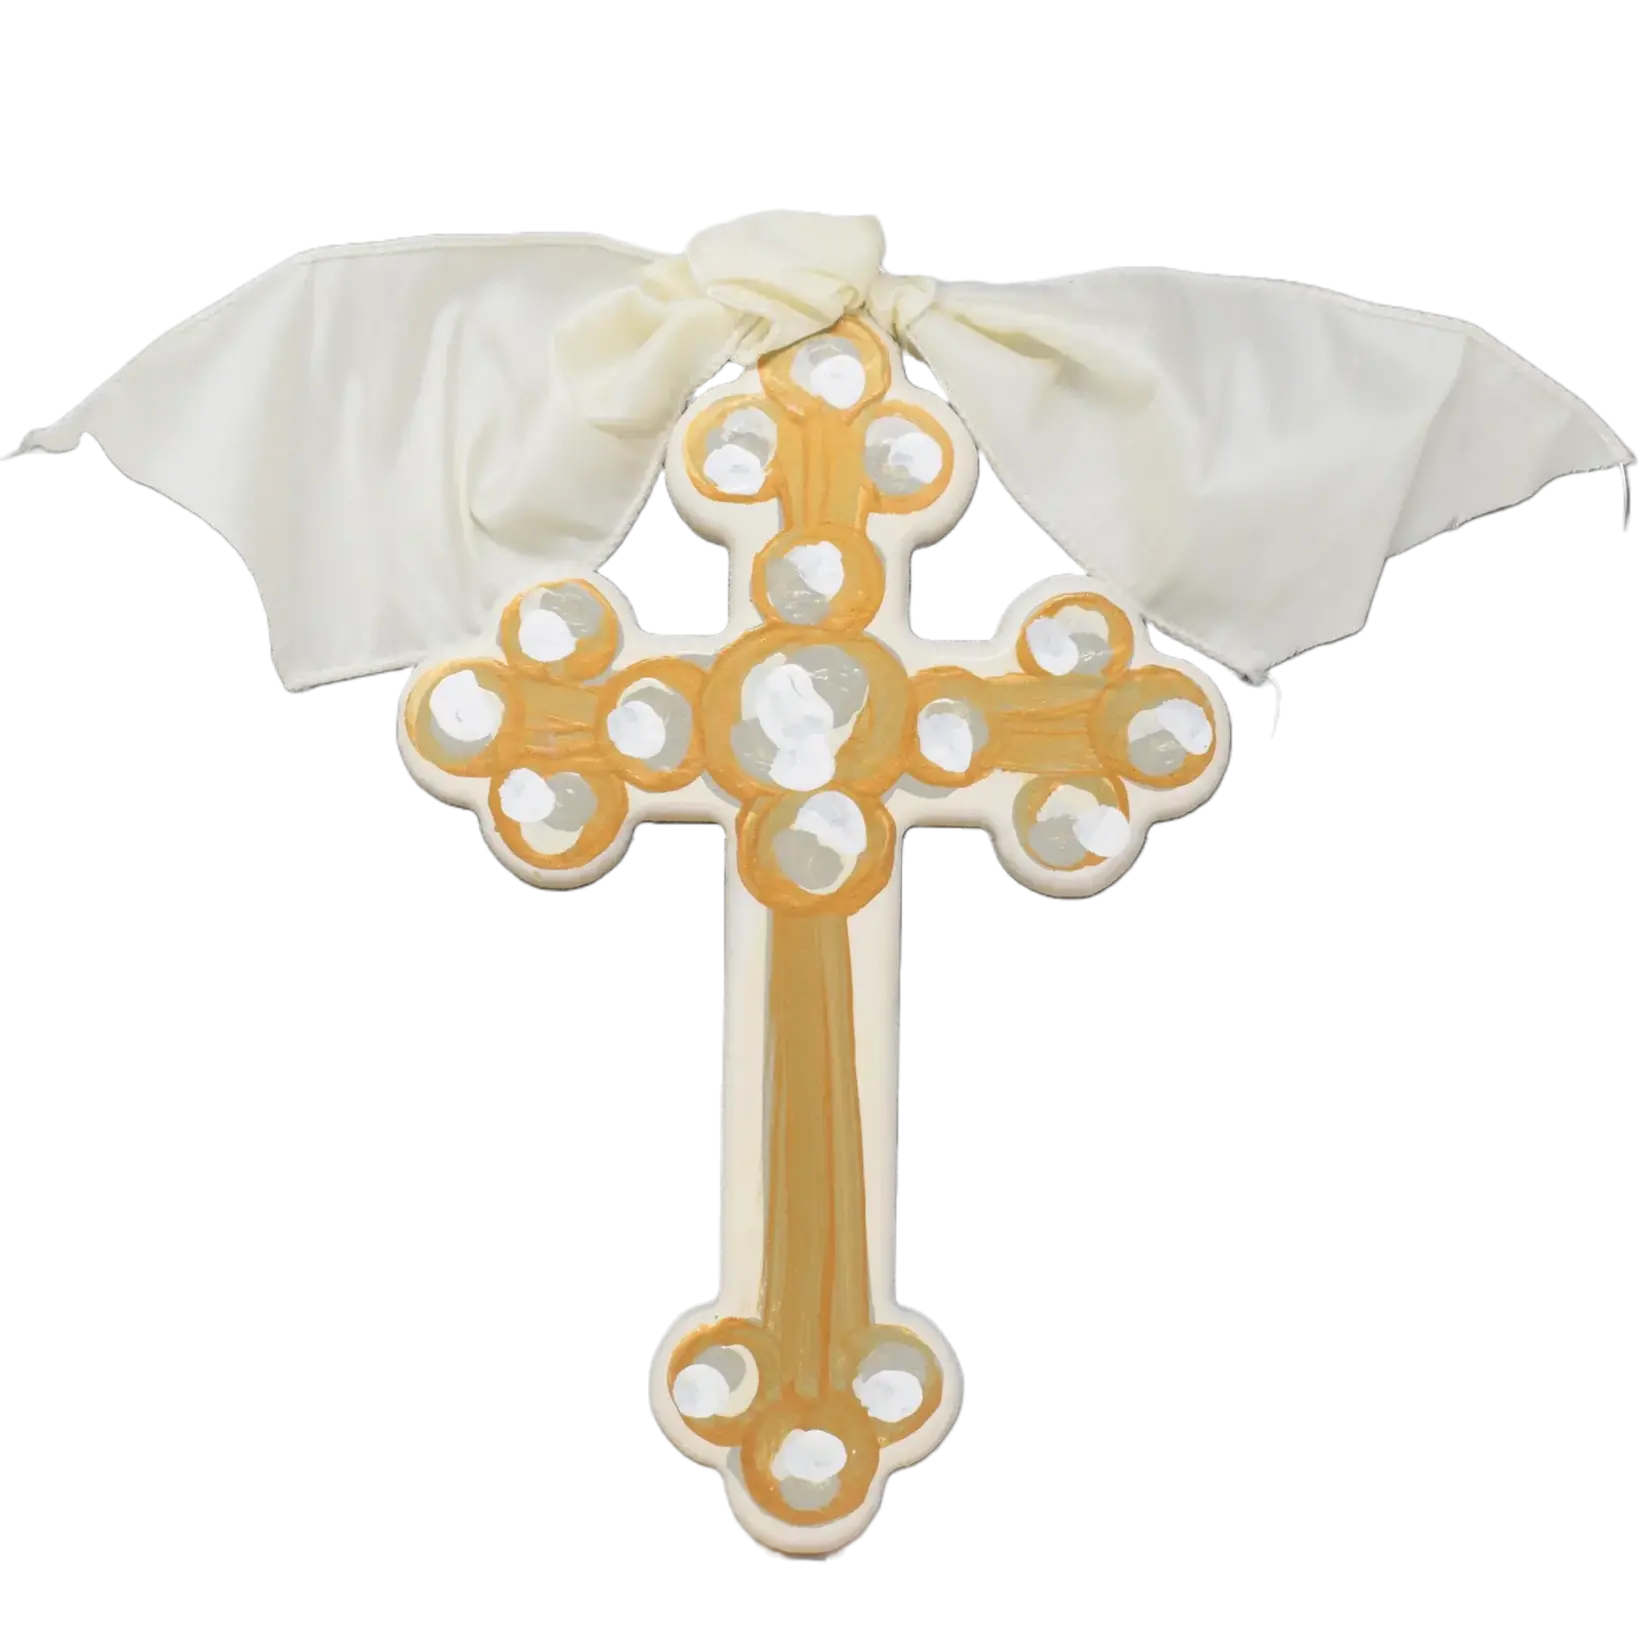 Have Mercy Gifts Peace Cross 24"